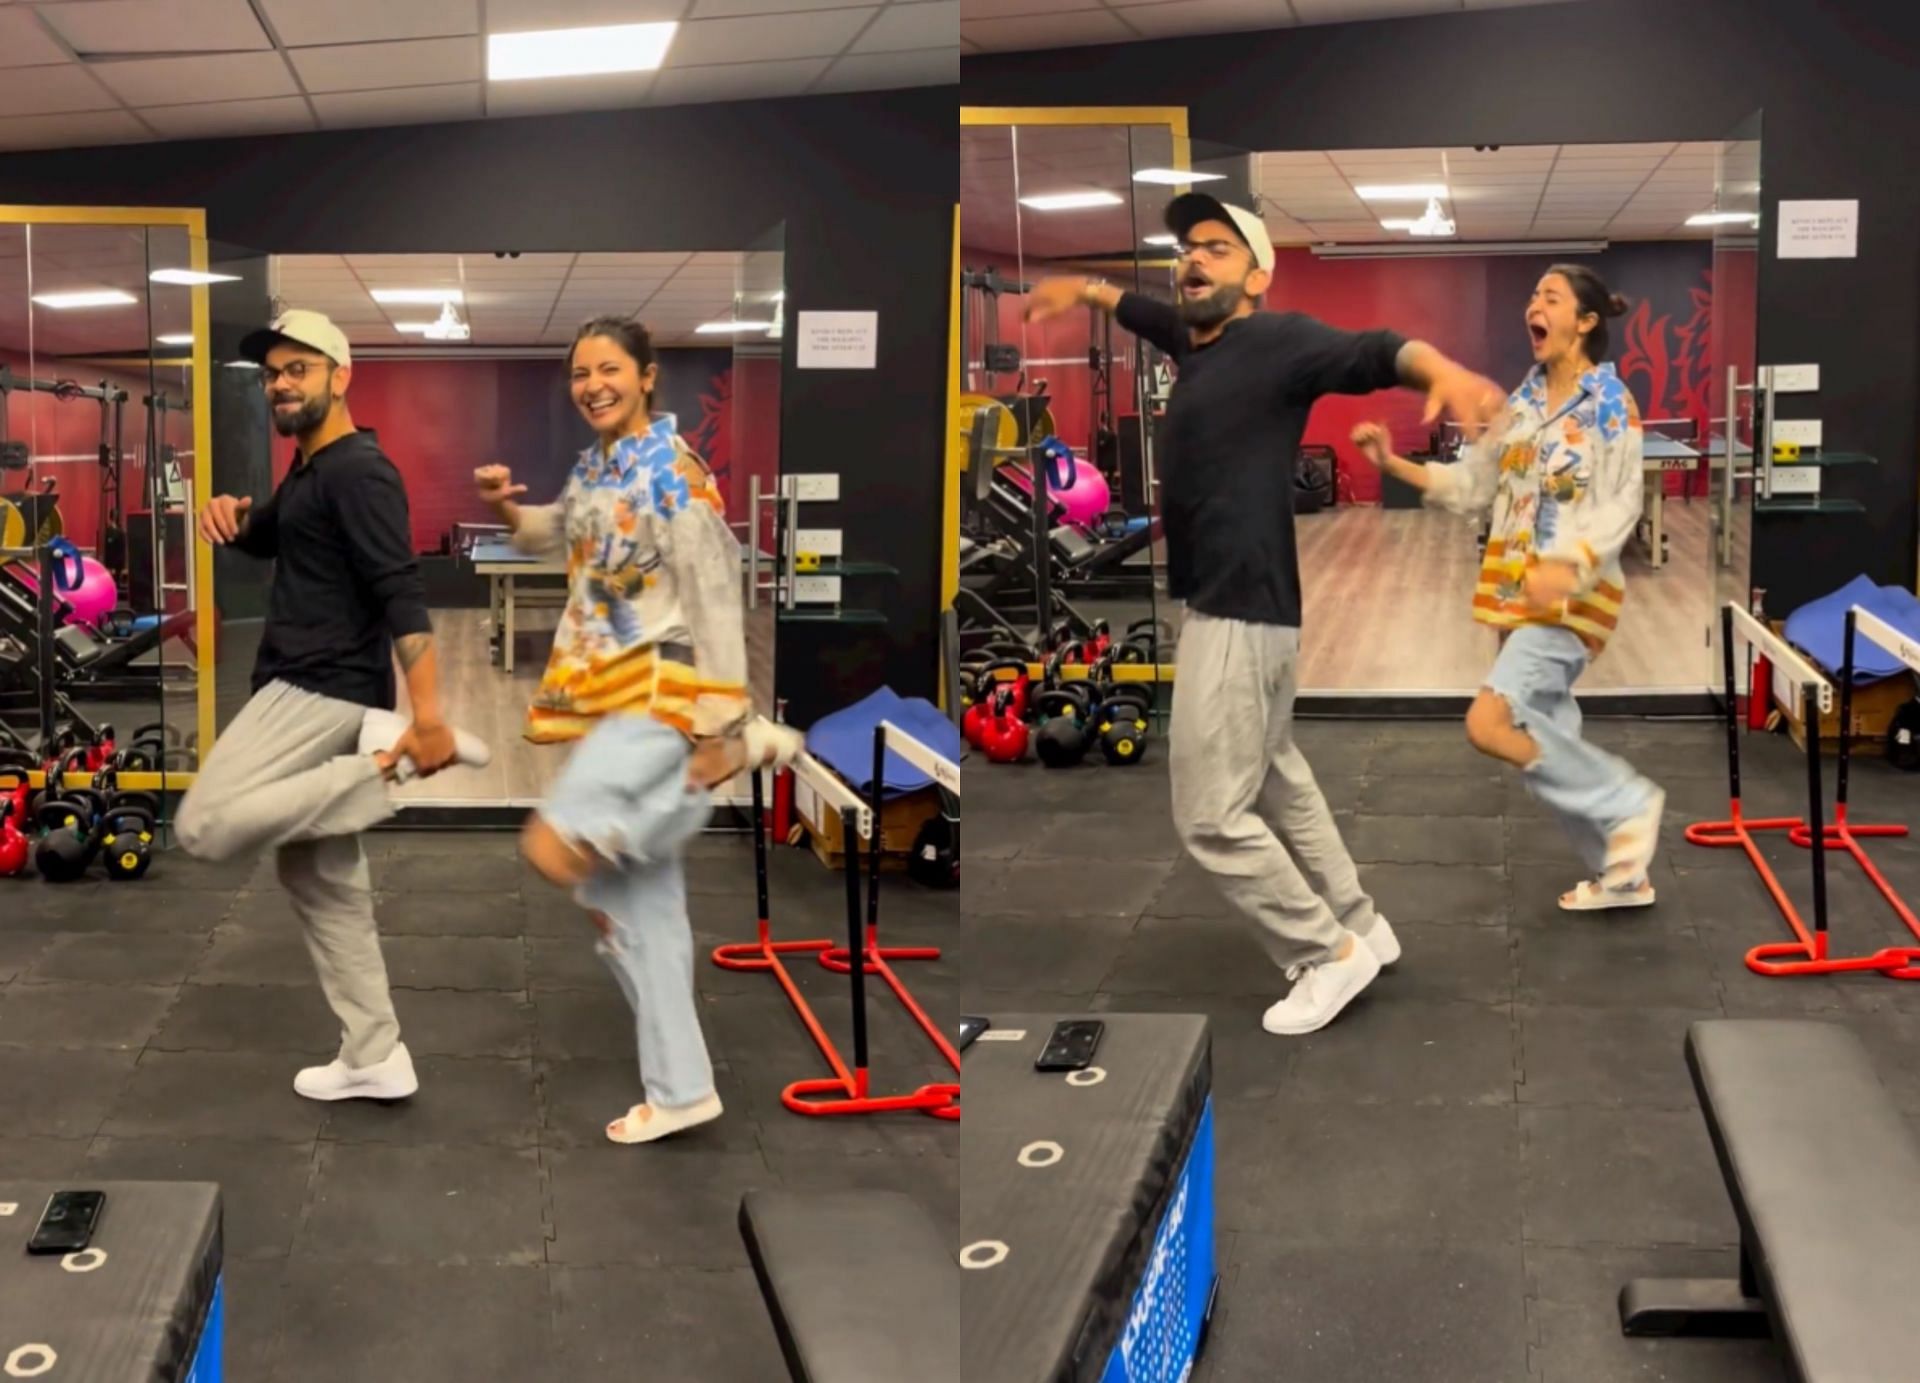 Virat Kohli and Anushka Sharma showing off their dance moves in a gym. 